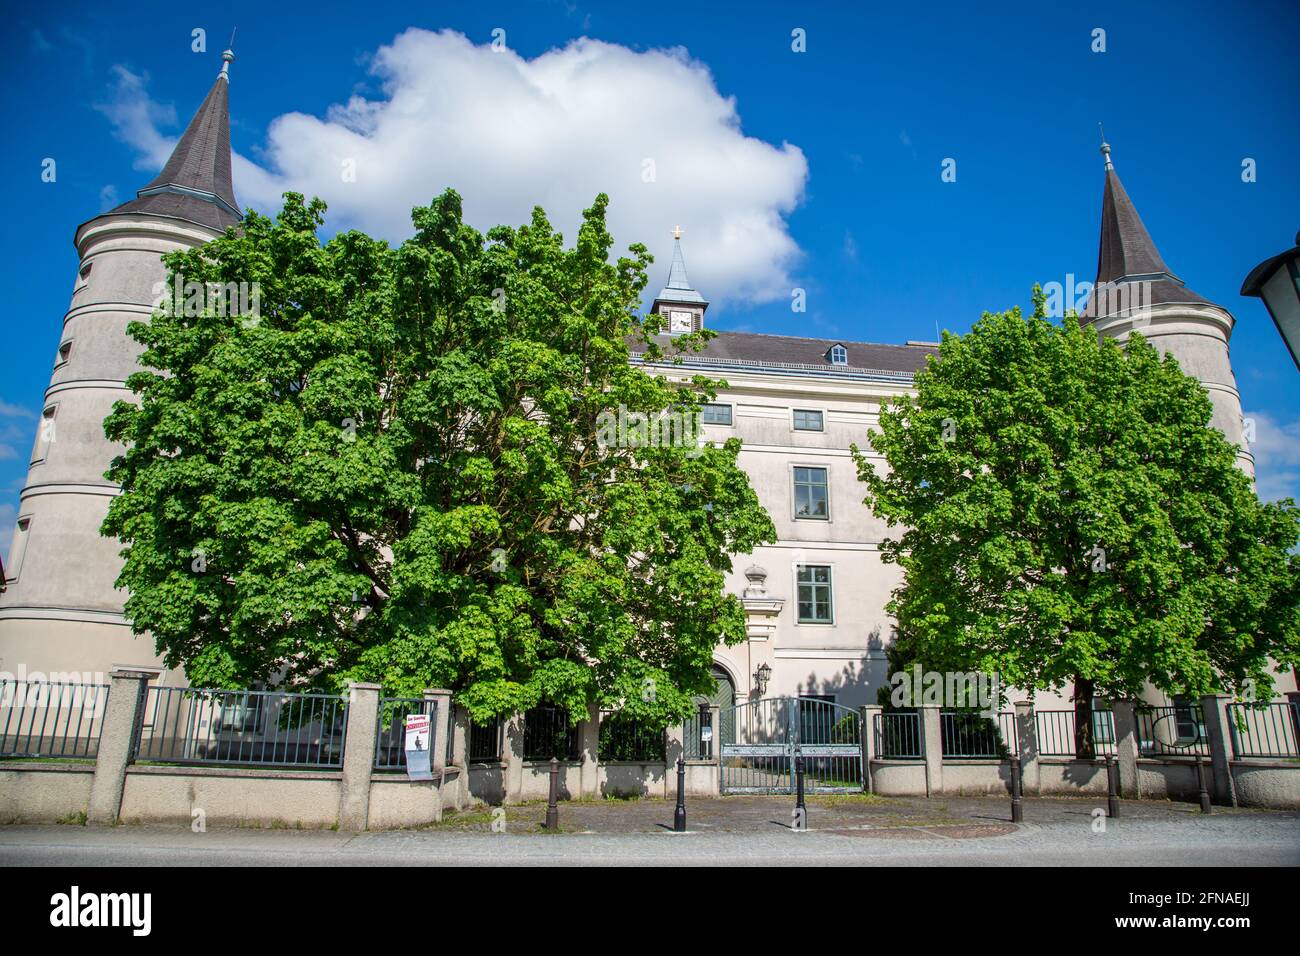 Wolfpassing castle, a baroque castle in the Mostviertel, Austria Stock Photo